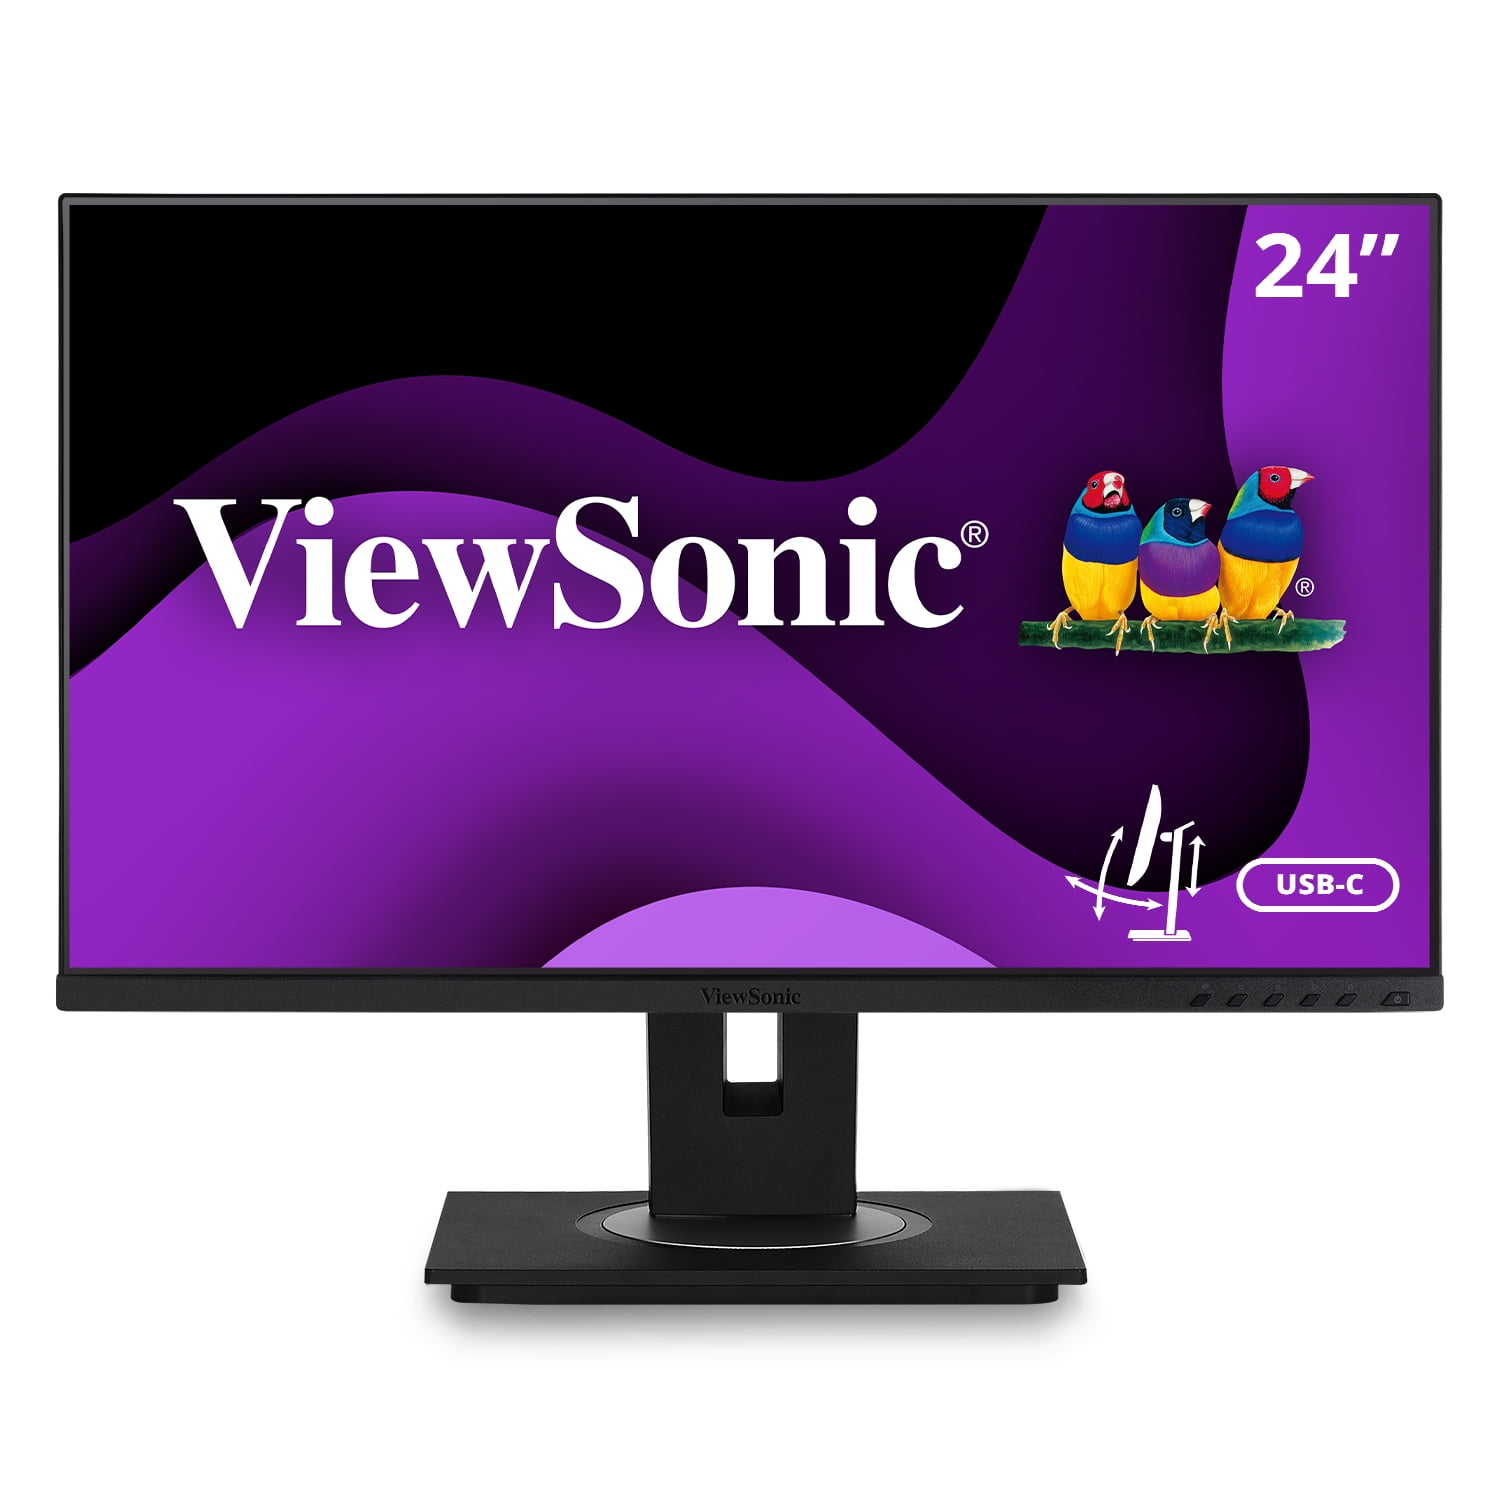 ViewSonic VG2456 24 Inch 1080p Monitor with USB C 3.2, Docking Built-In  Gigabit Ethernet and 40 Degree Tilt Ergonomics for Home and Office 